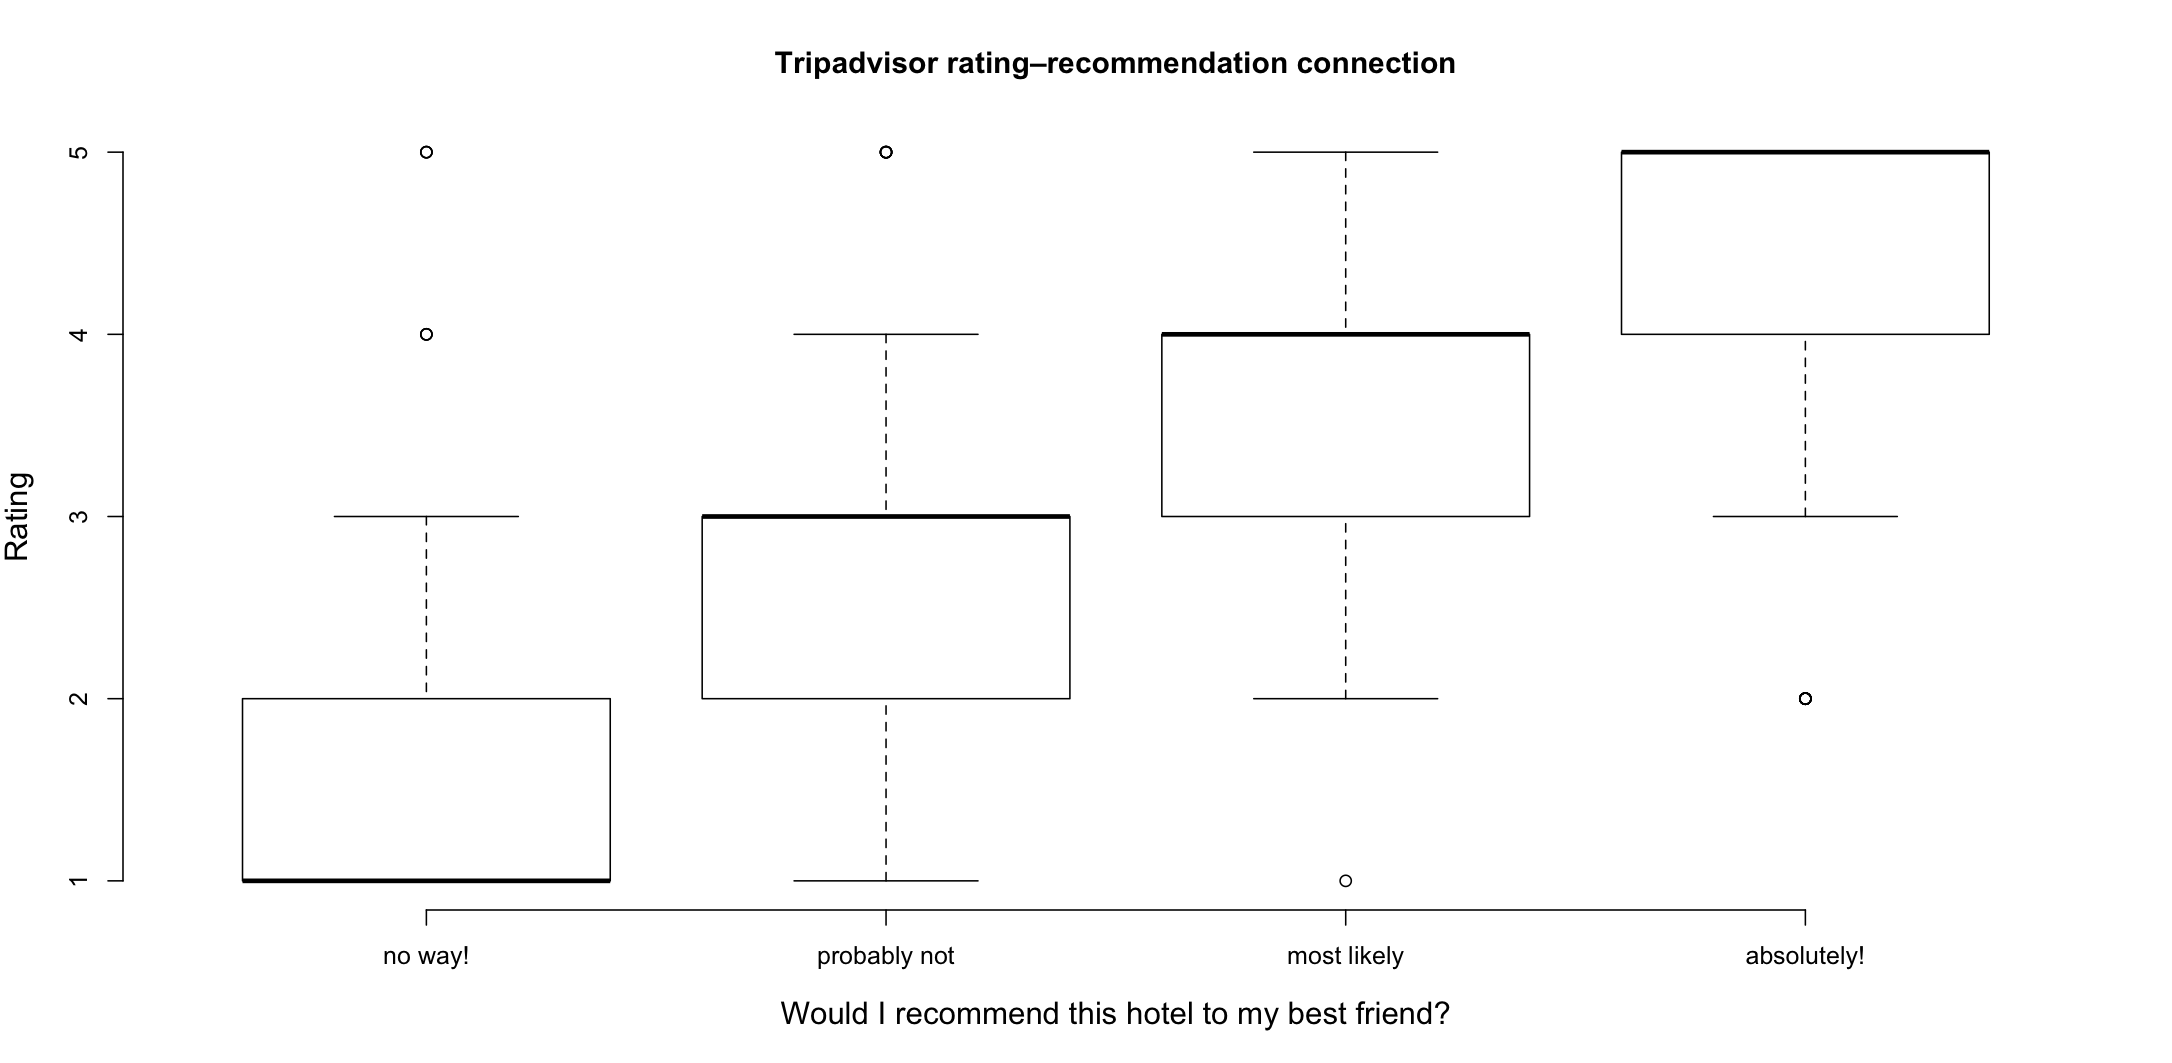 figures/ta-ratings-by-recommendation.png